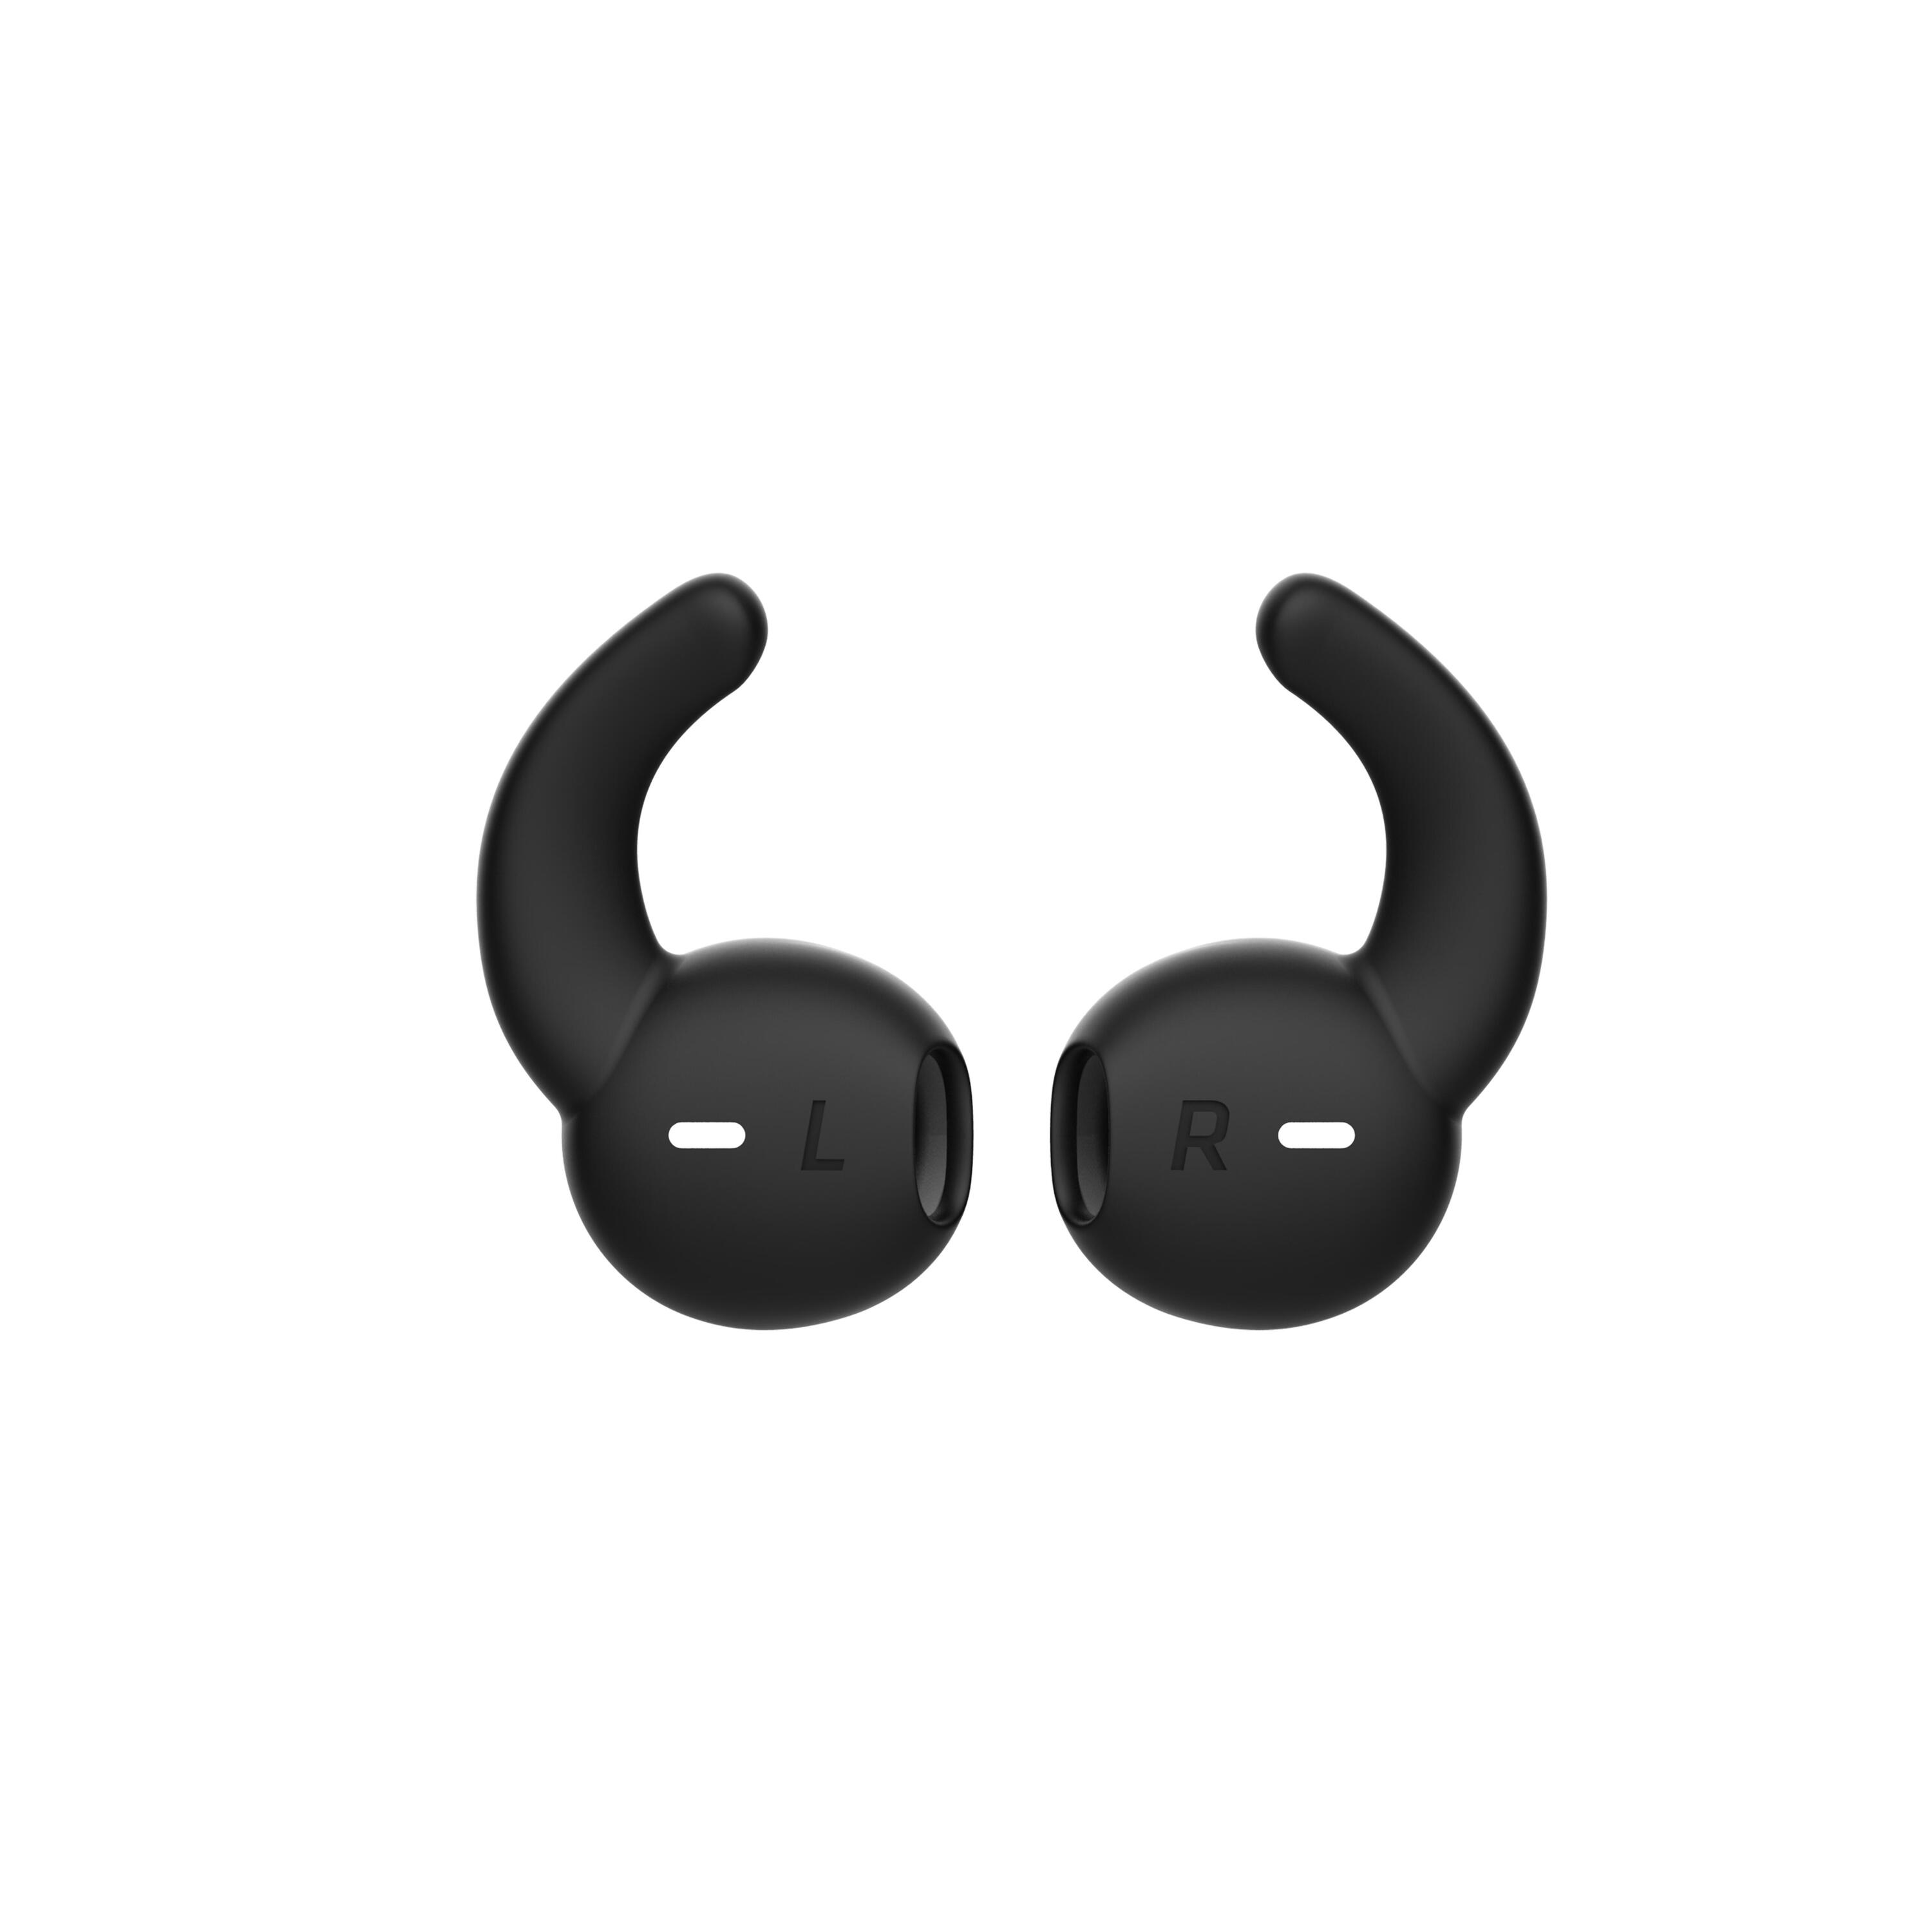 KALENJI ONEAR 100 EARBUD TIPS FOR RUNNING EARBUDS BLACK 1/1